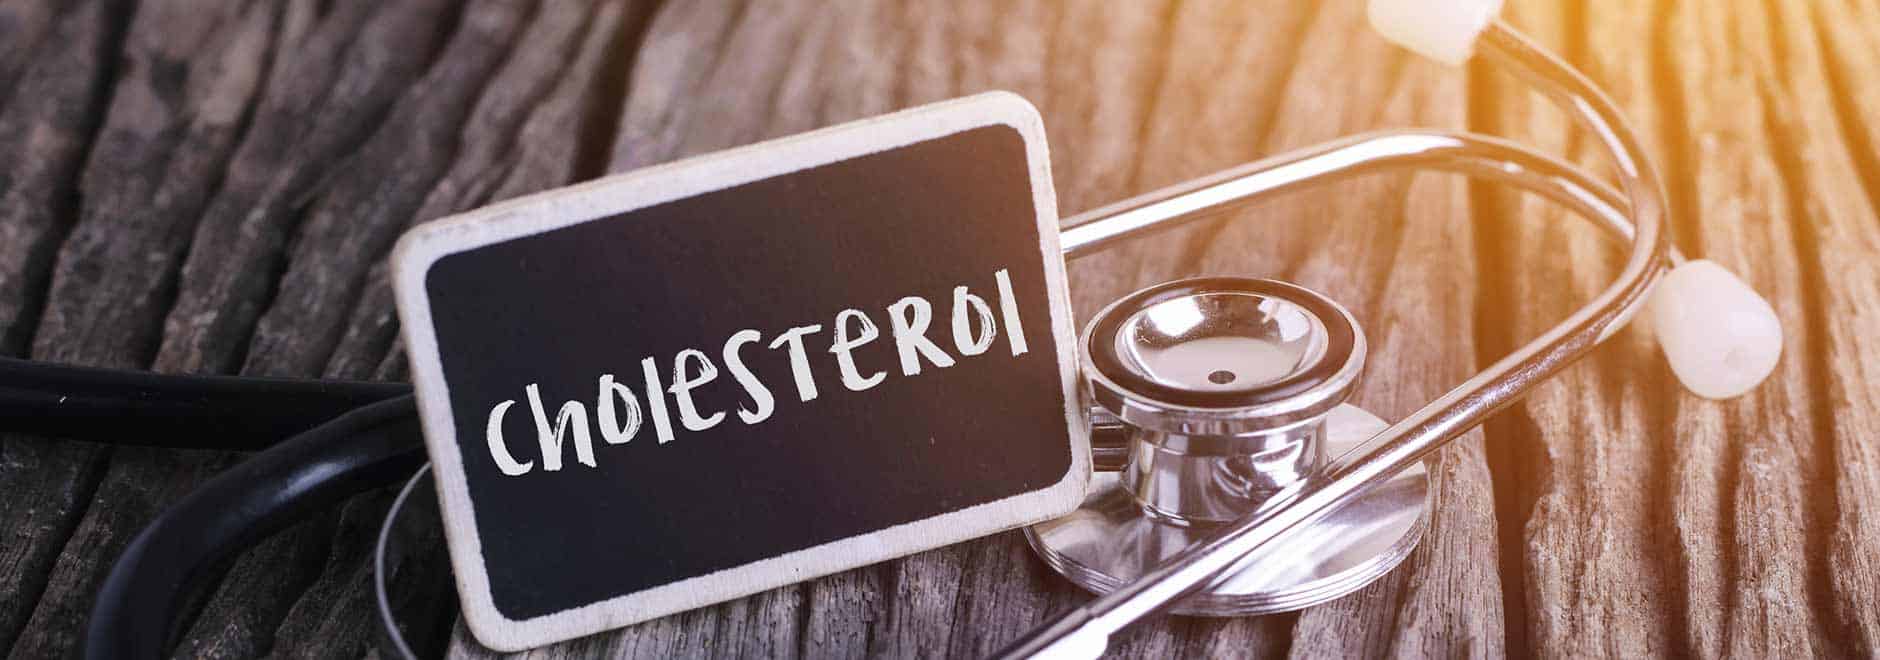 Bad cholesterol levels in youth can help predict the risk of heart disease